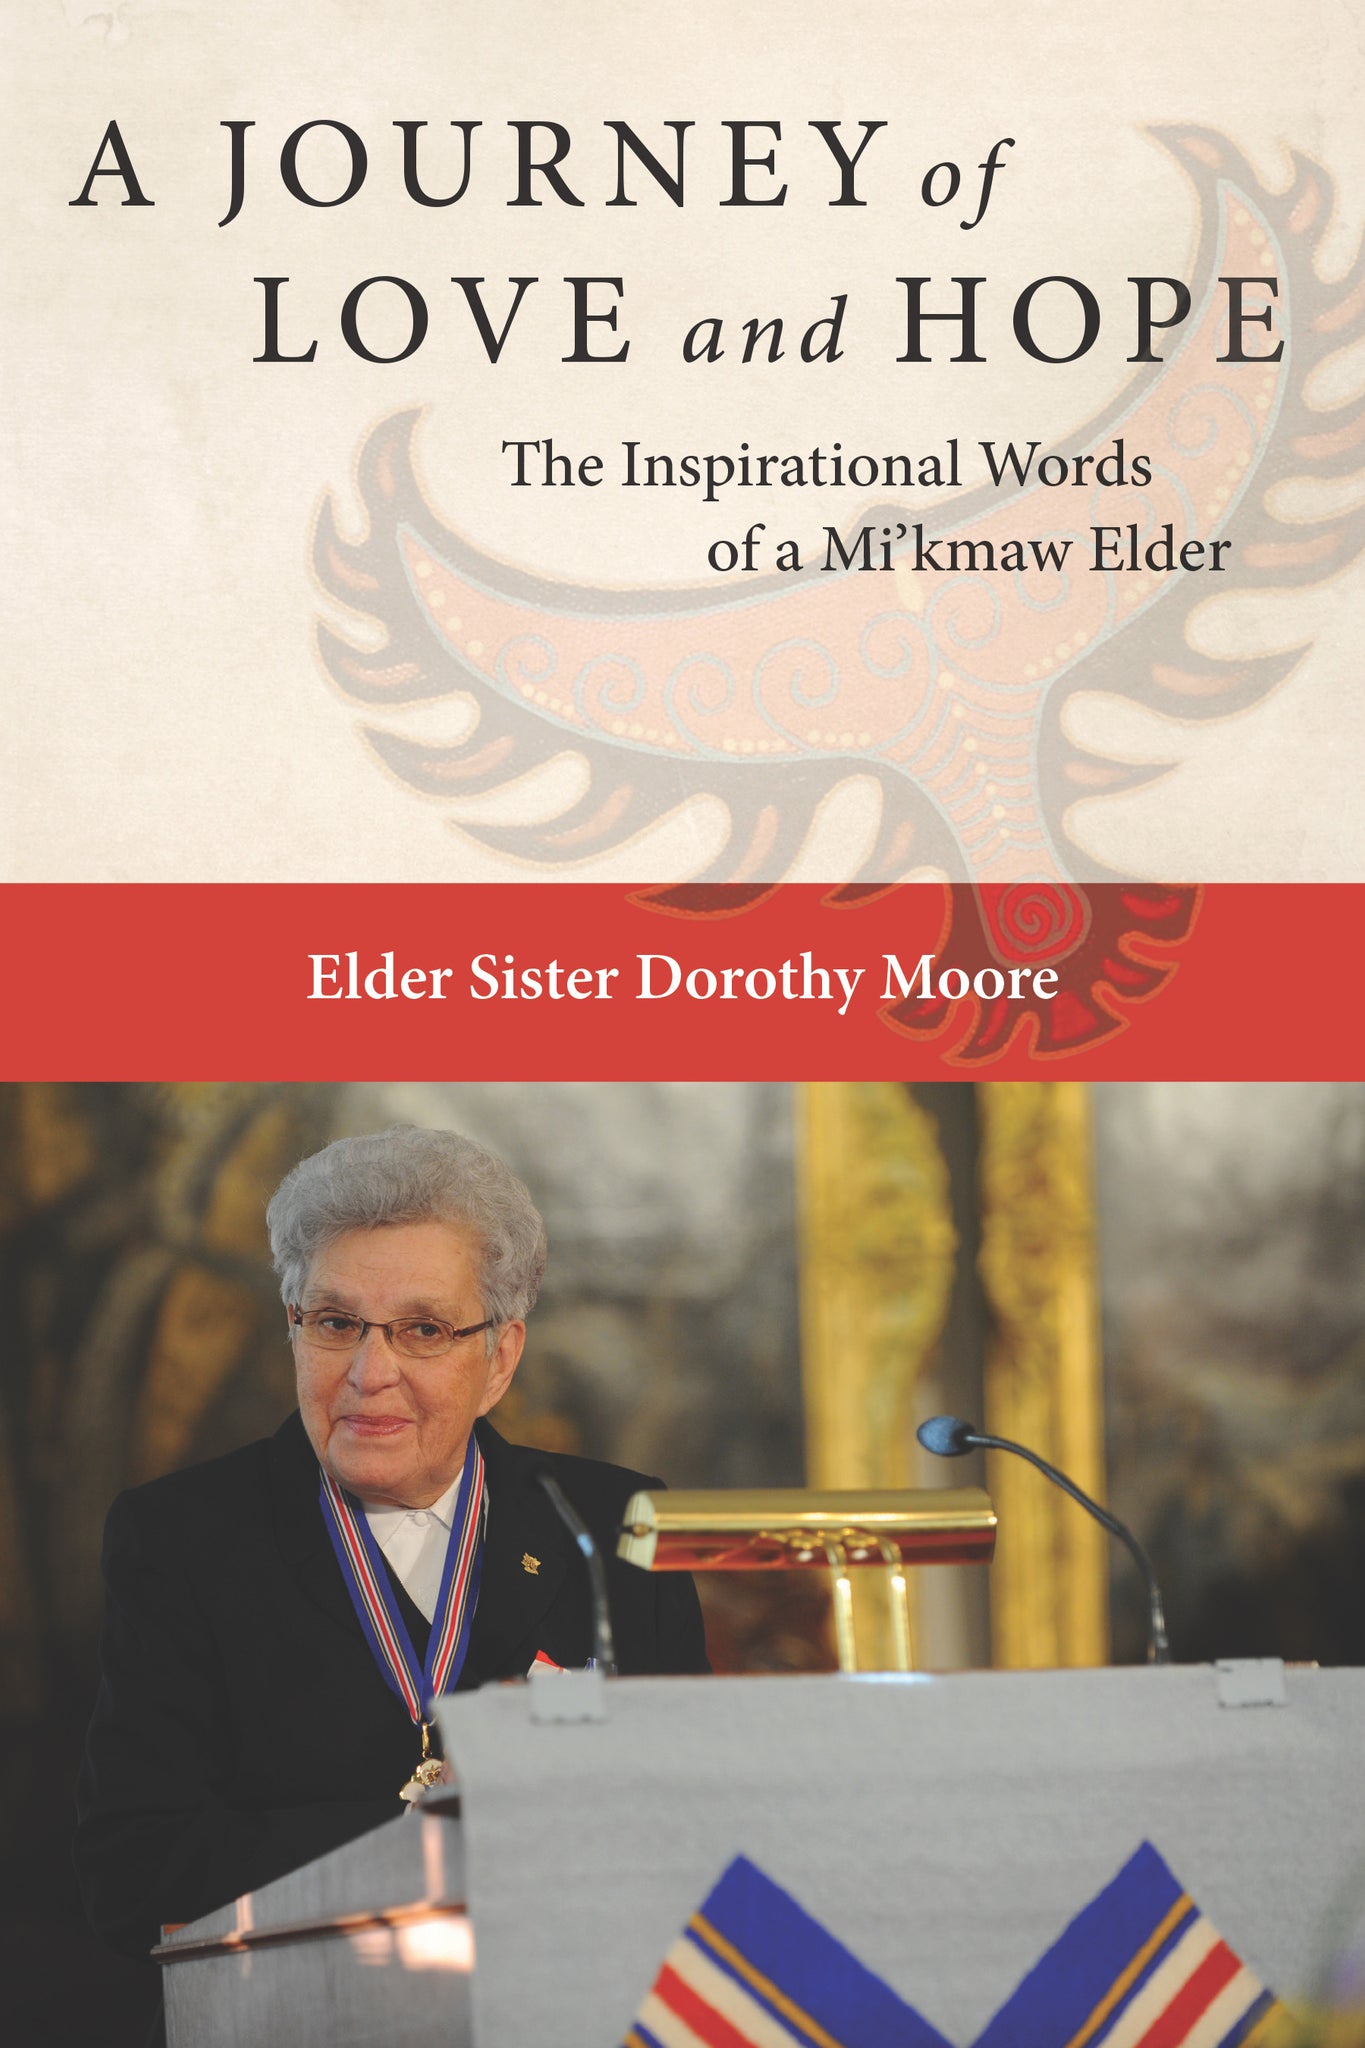 A Journey of Love and Hope: The Inspirational Words of a Mi’kmaw Elder